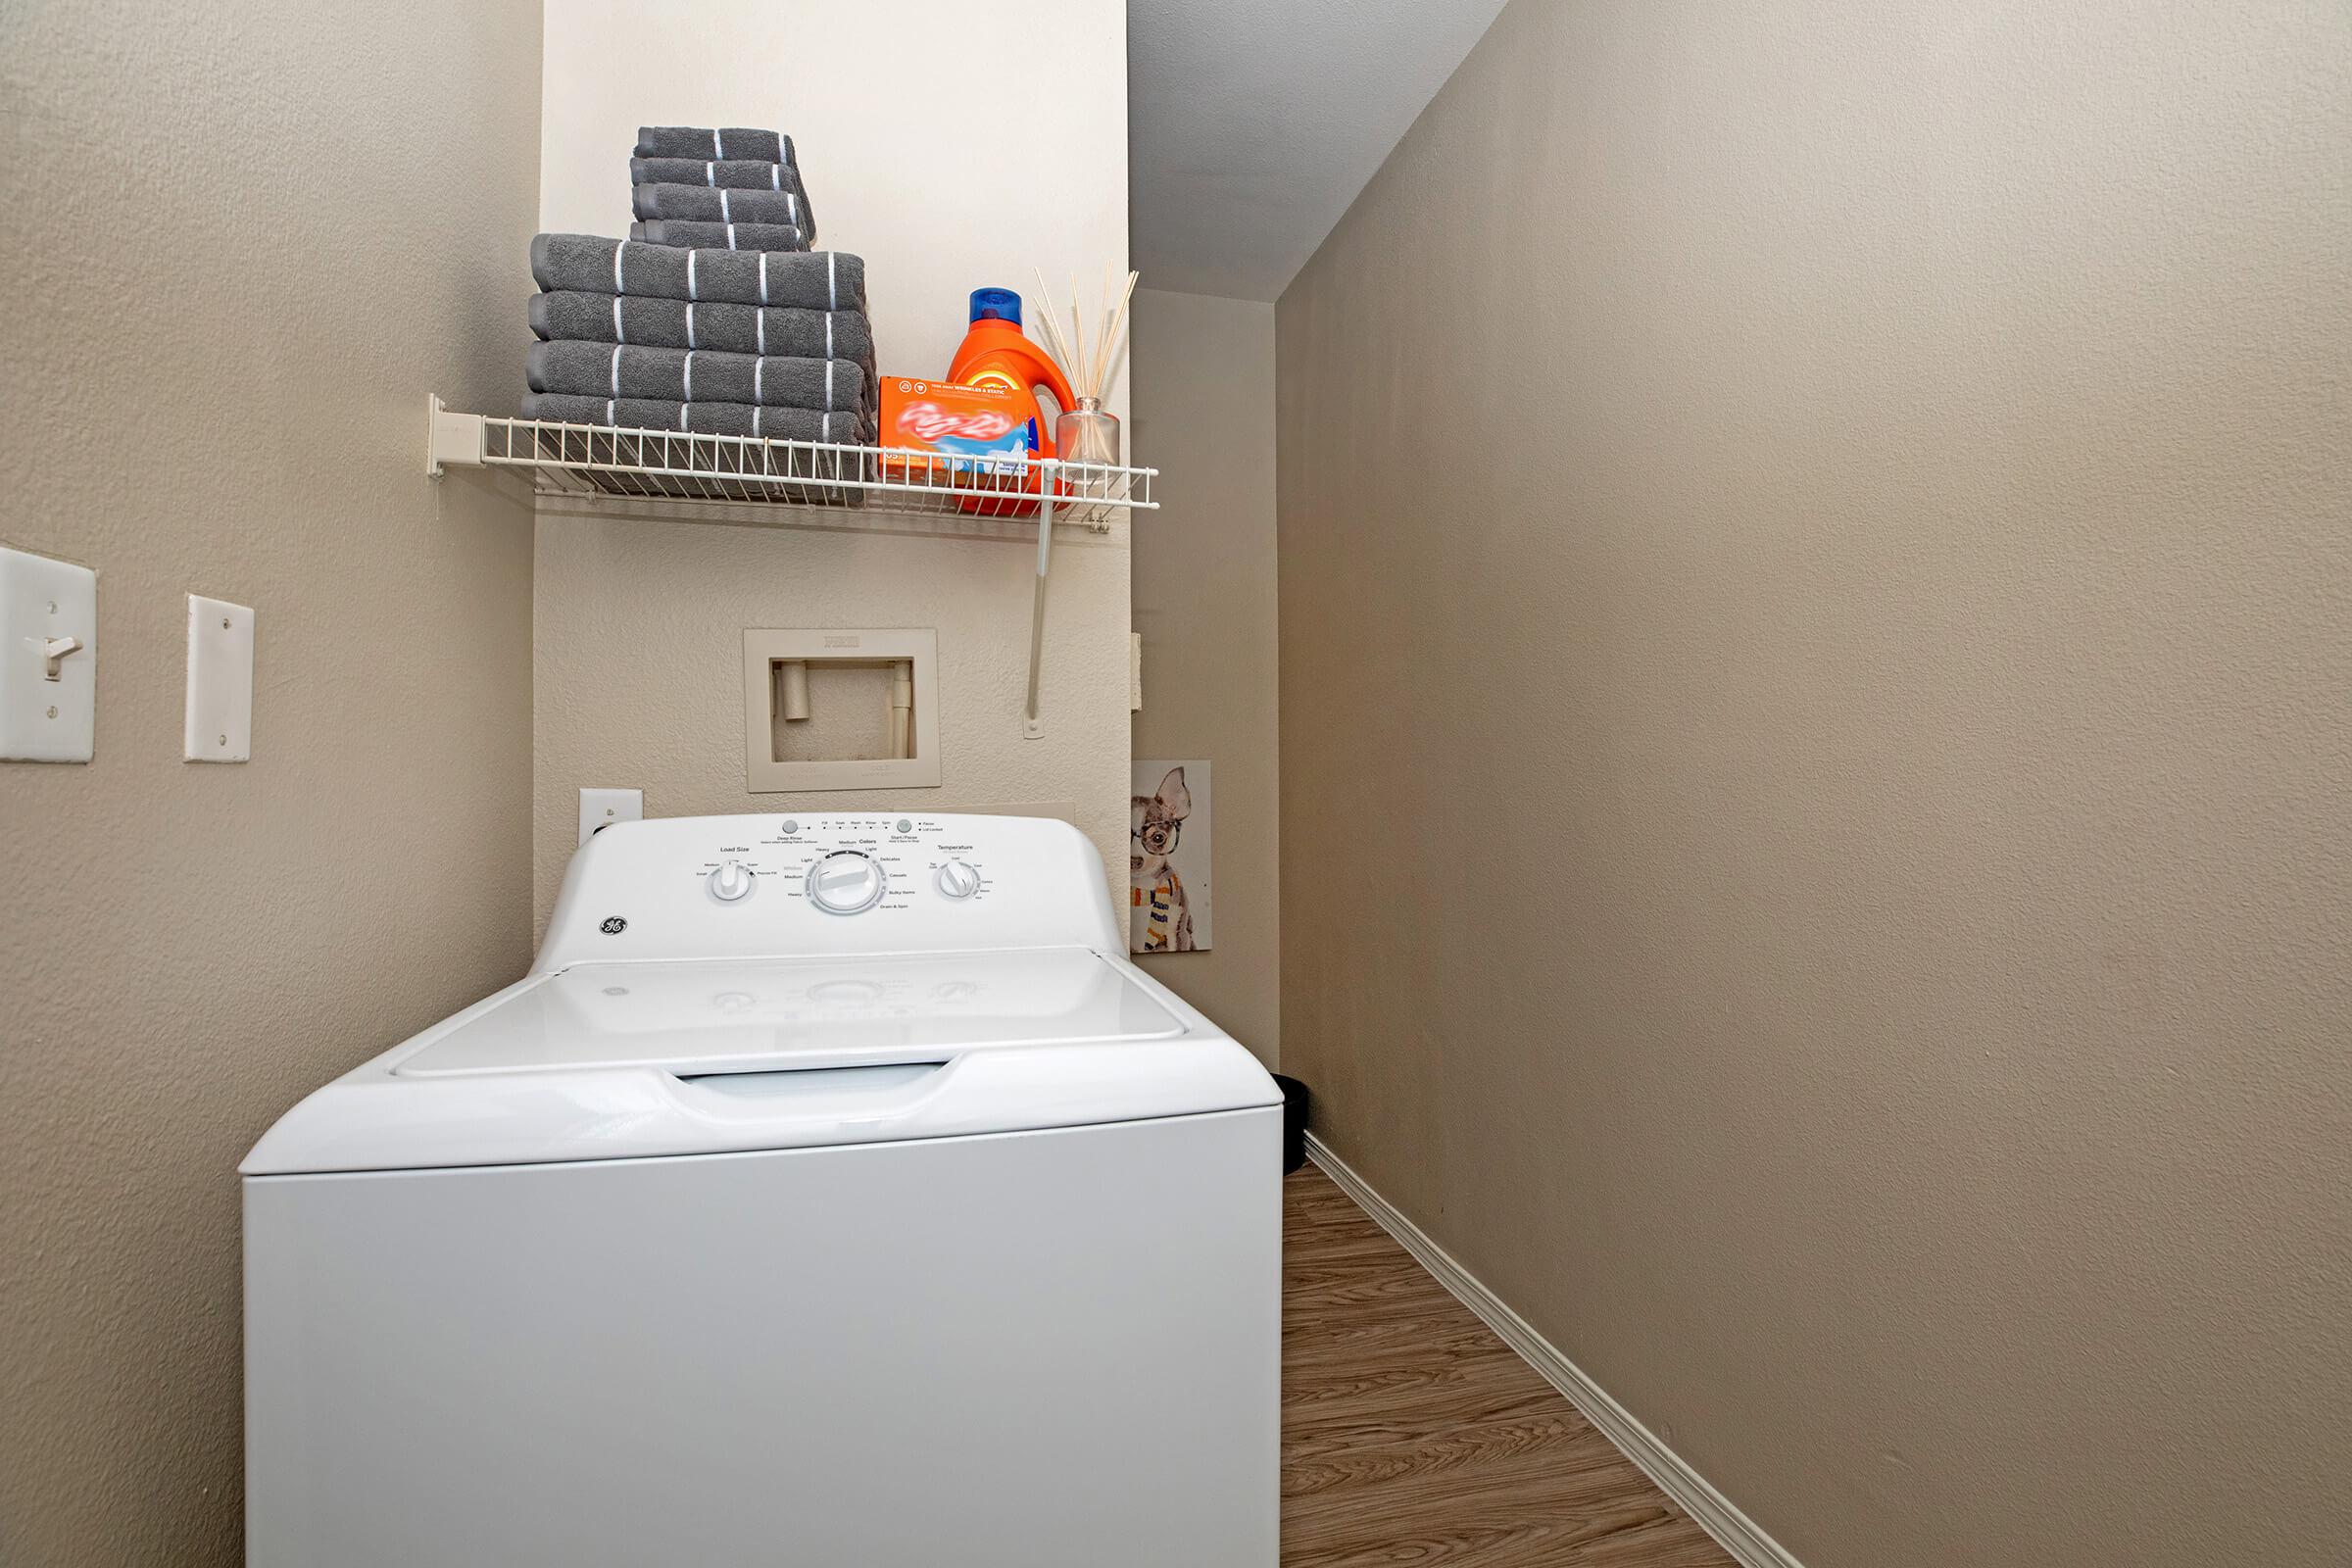 washer in the laundry room